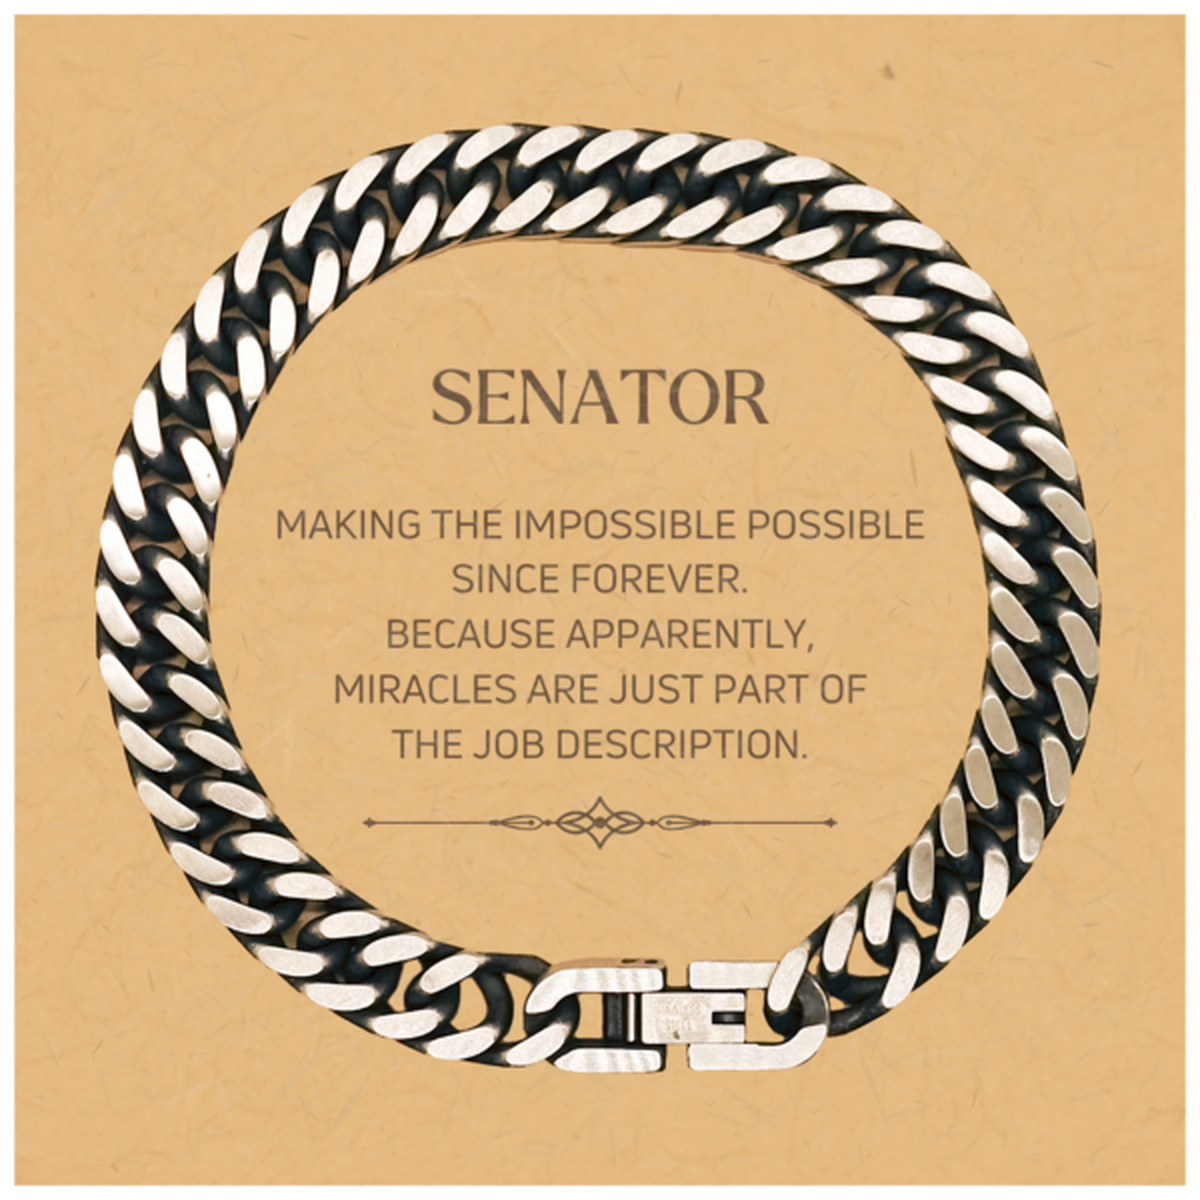 Funny Senator Gifts, Miracles are just part of the job description, Inspirational Birthday Christmas Cuban Link Chain Bracelet For Senator, Men, Women, Coworkers, Friends, Boss